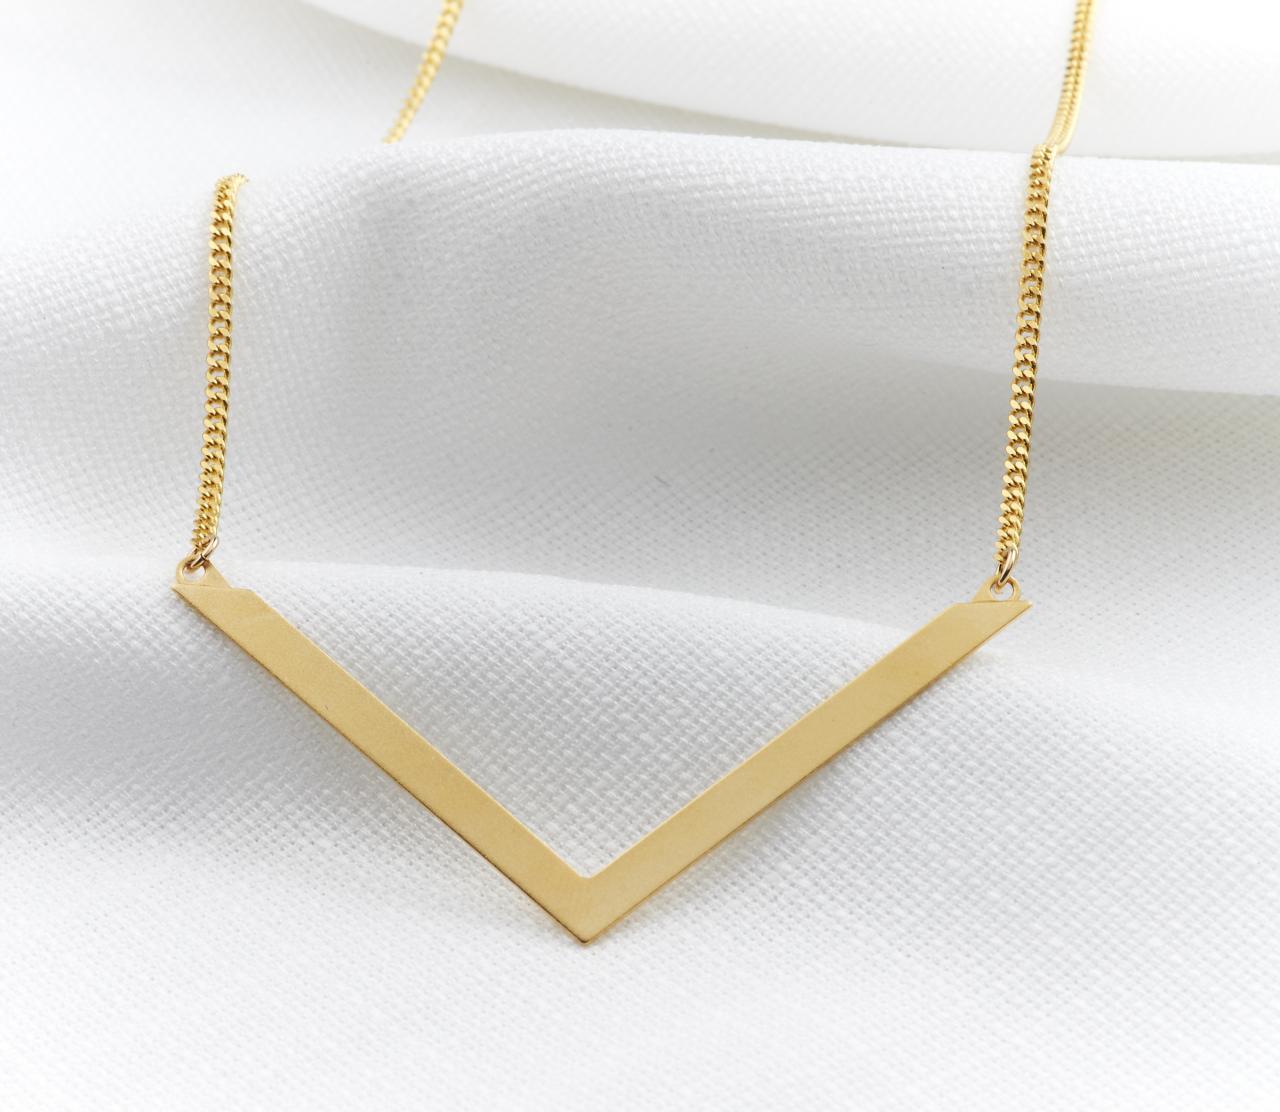 Gold Long Necklace - Gold Geometric Necklace, Chevron Necklace, Brass Gold Chevron Necklace, Delicate Necklace, Gold Jewelry Gift